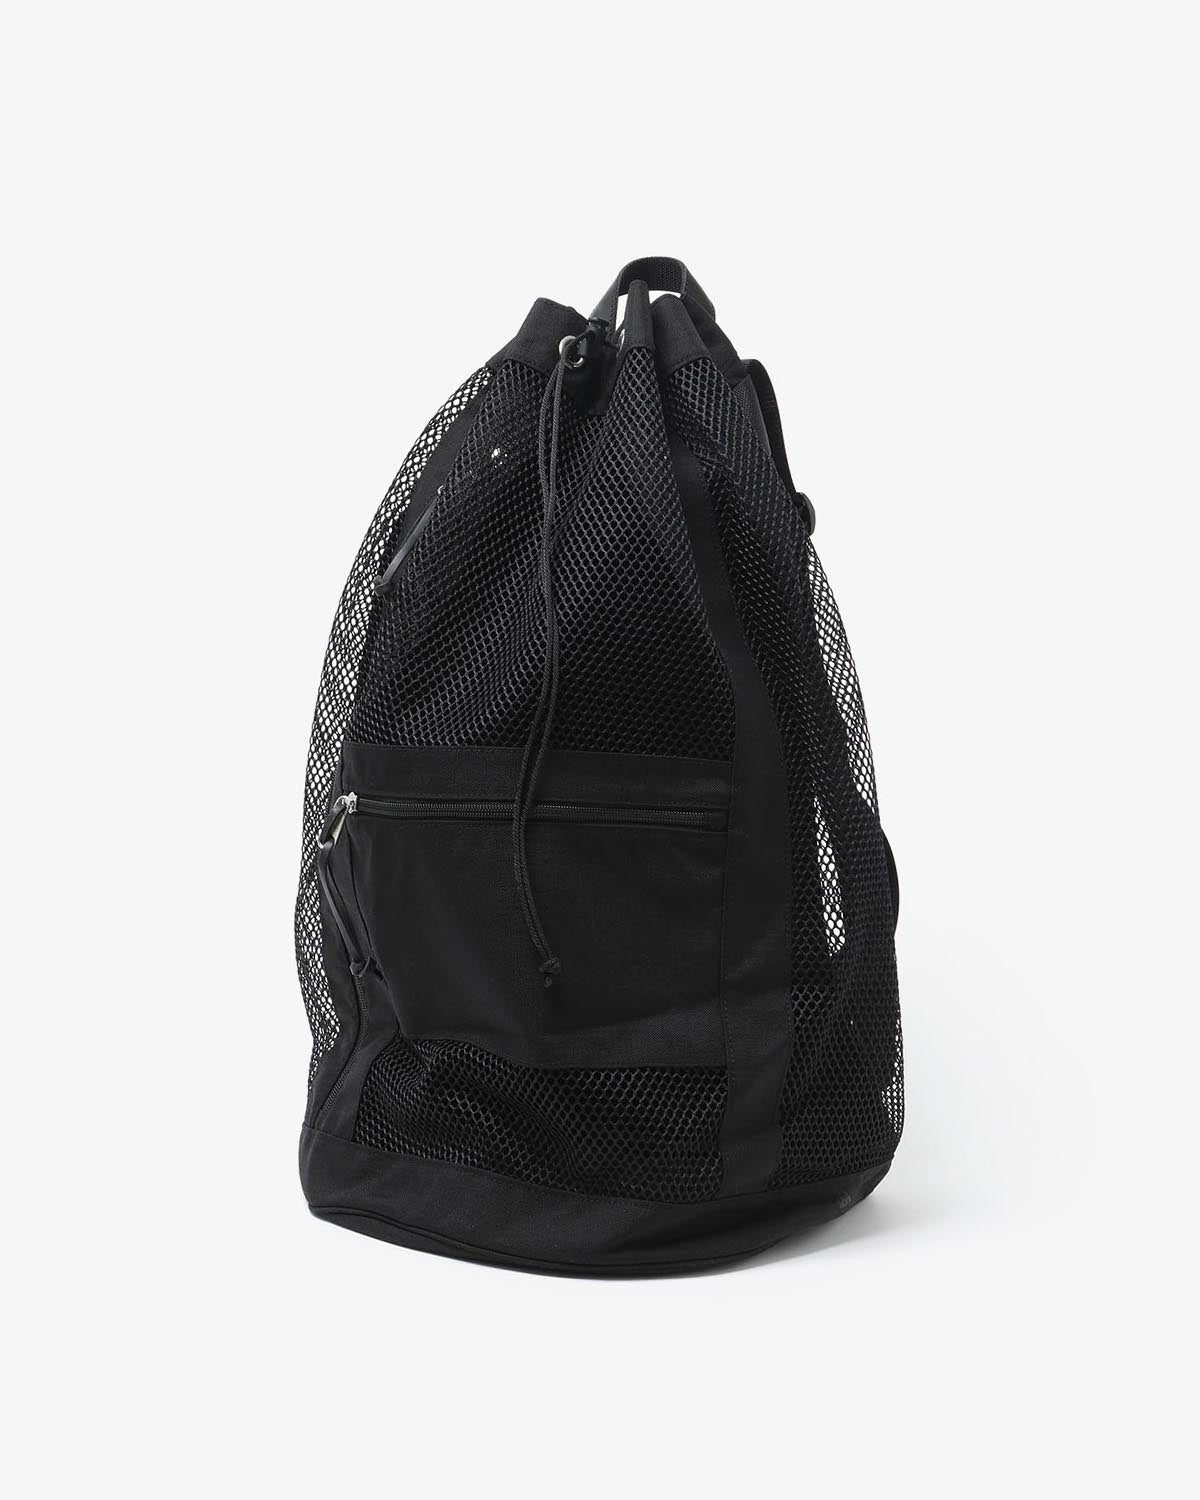 MESH LARGE BACKPACK MADE BY AETA